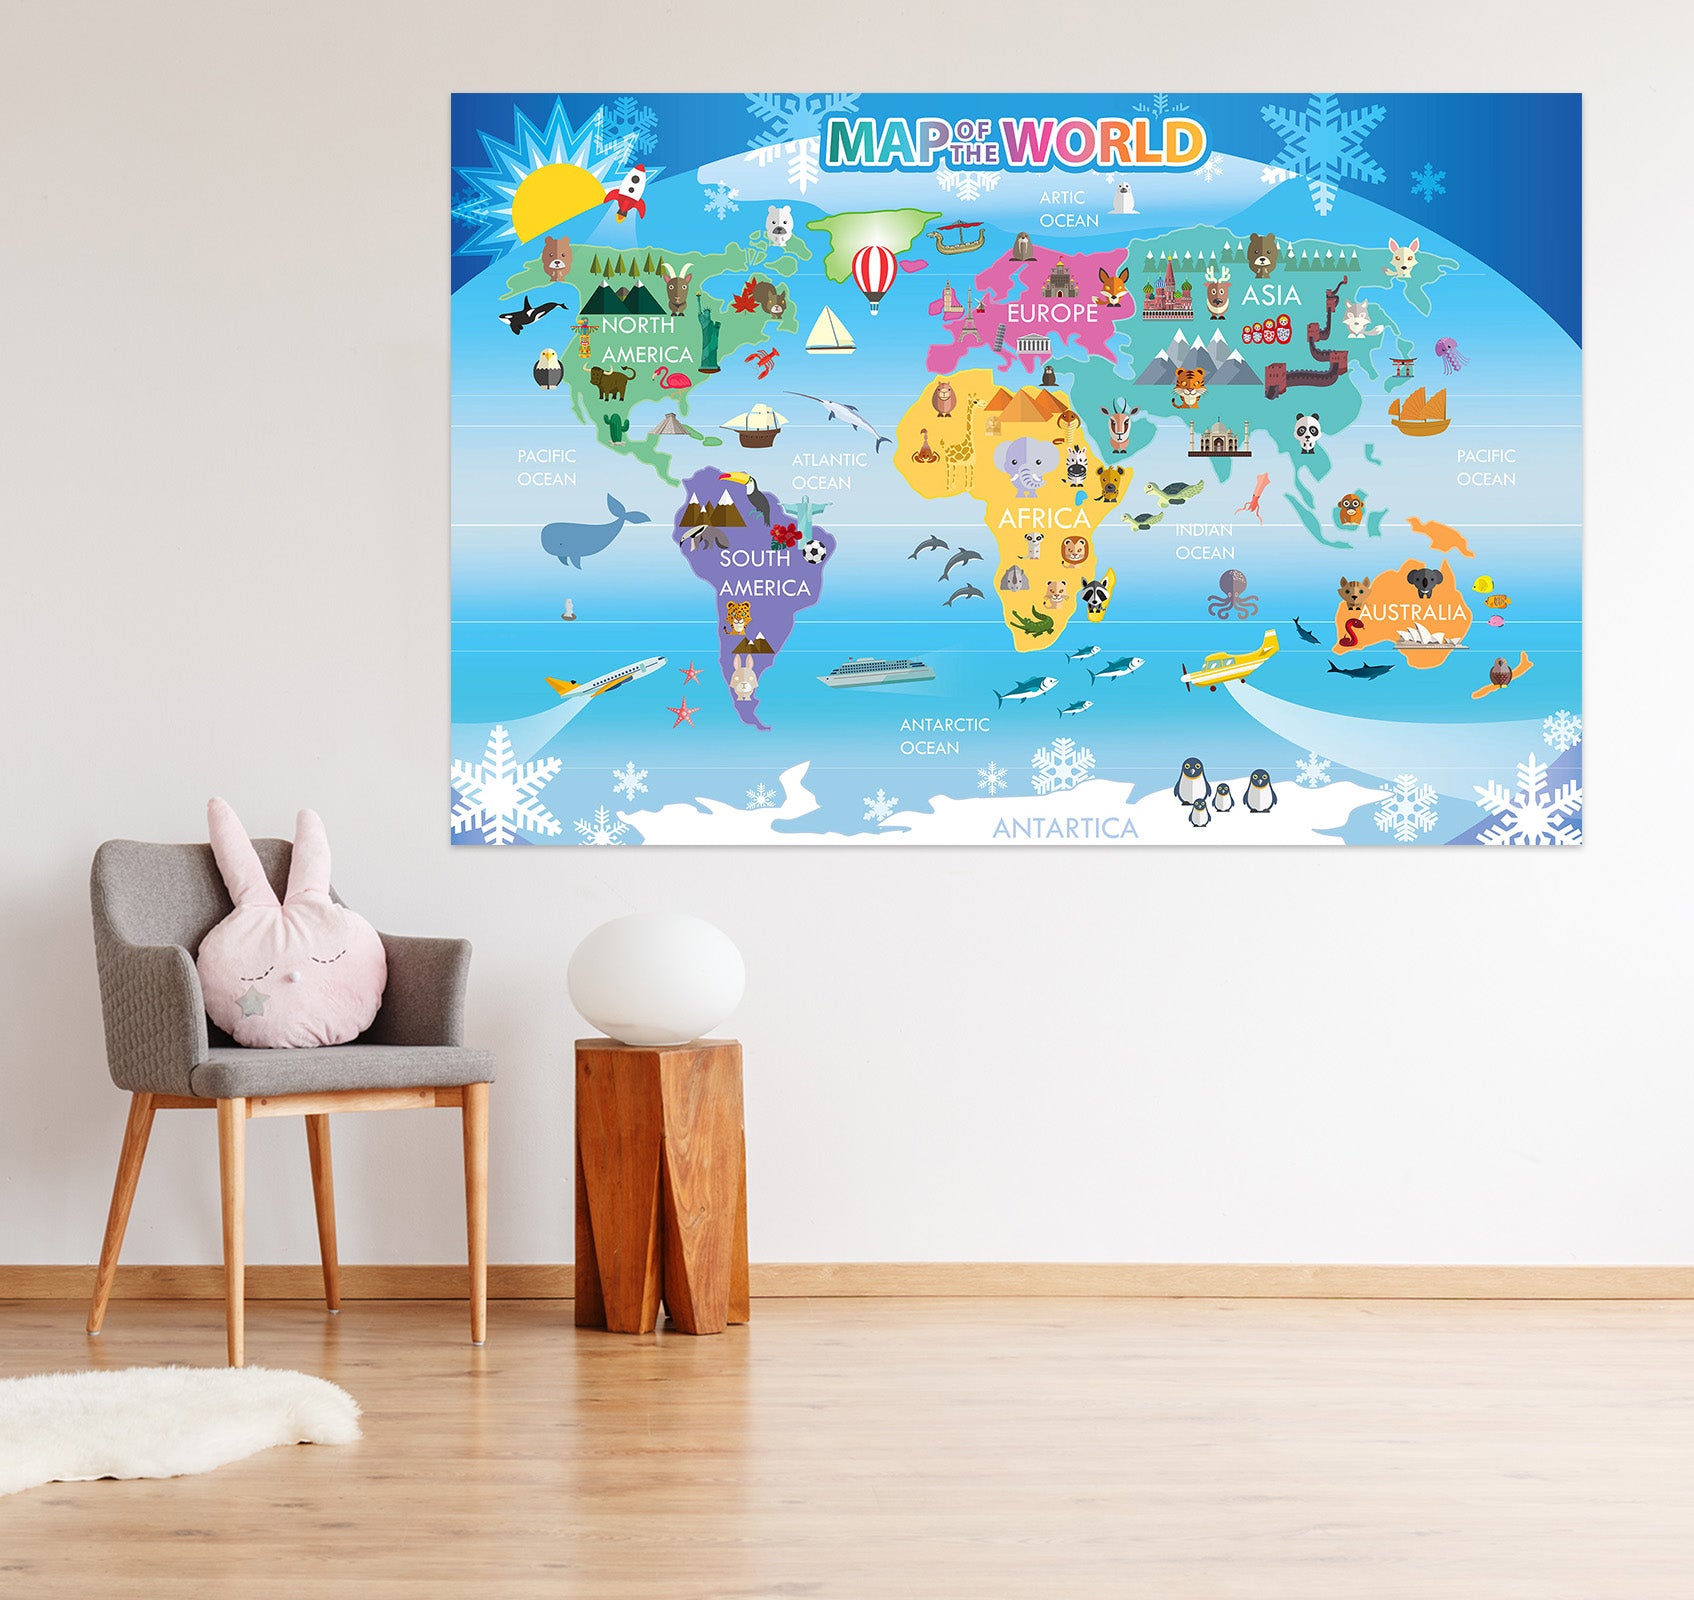 3D Color Clouds 245 World Map Wall Sticker